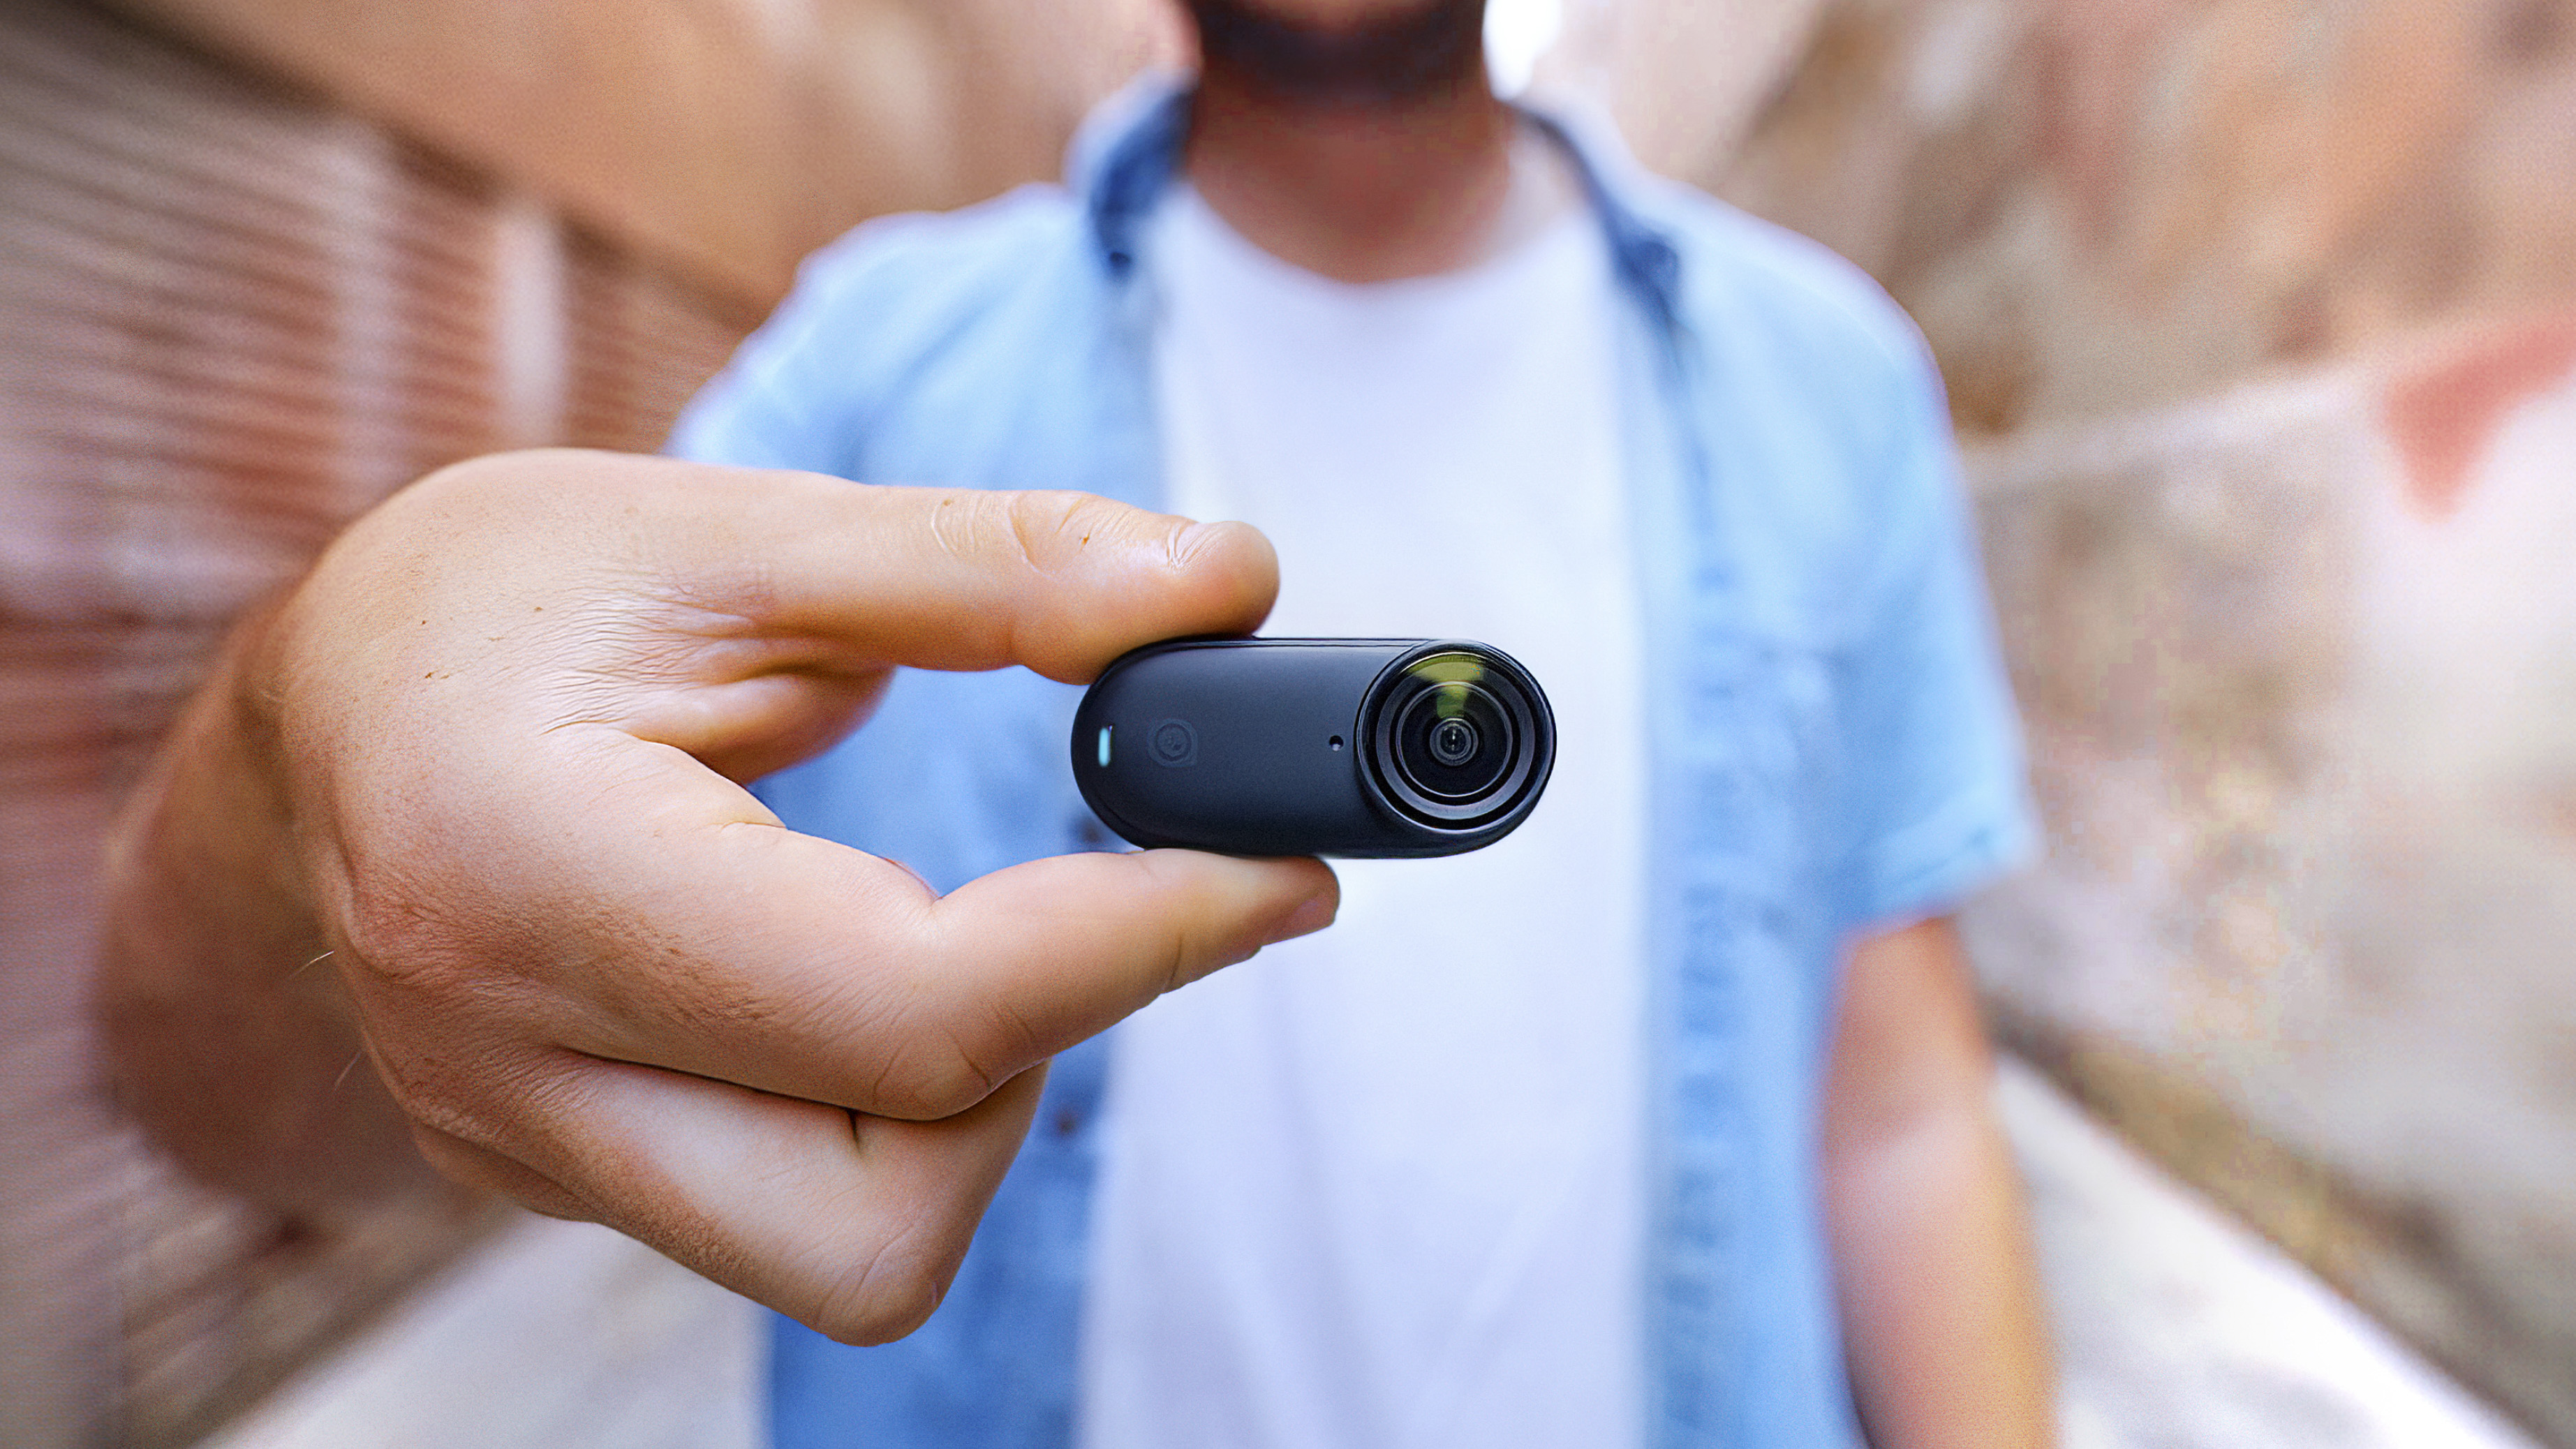 Insta360 Go 3S camera close up view with a person out of focus